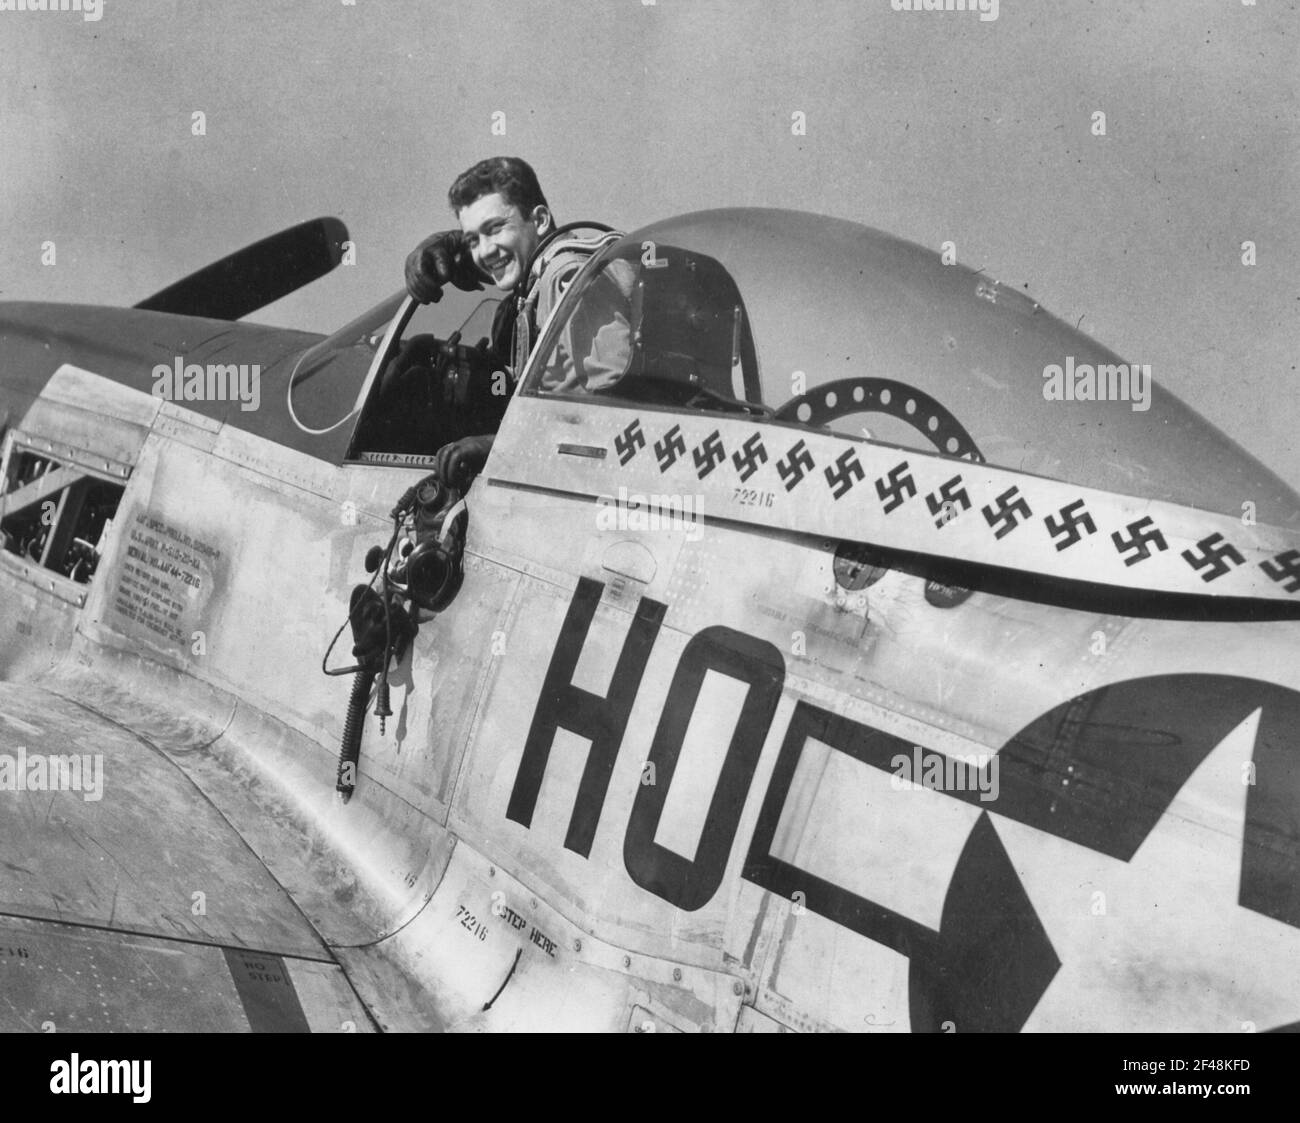 England - Capt. Raymond H. Littge, Of Altenburg, Mo., Brought His Score To 23 1/2 German Planes Destroyed (10 1/2 In Air, 13 Ground) By Adding Nine Ground Kills To His Record In Two Days Of Ground Strafing. The 21 Year Old 352Nd North American P-51 Mustang Stock Photo